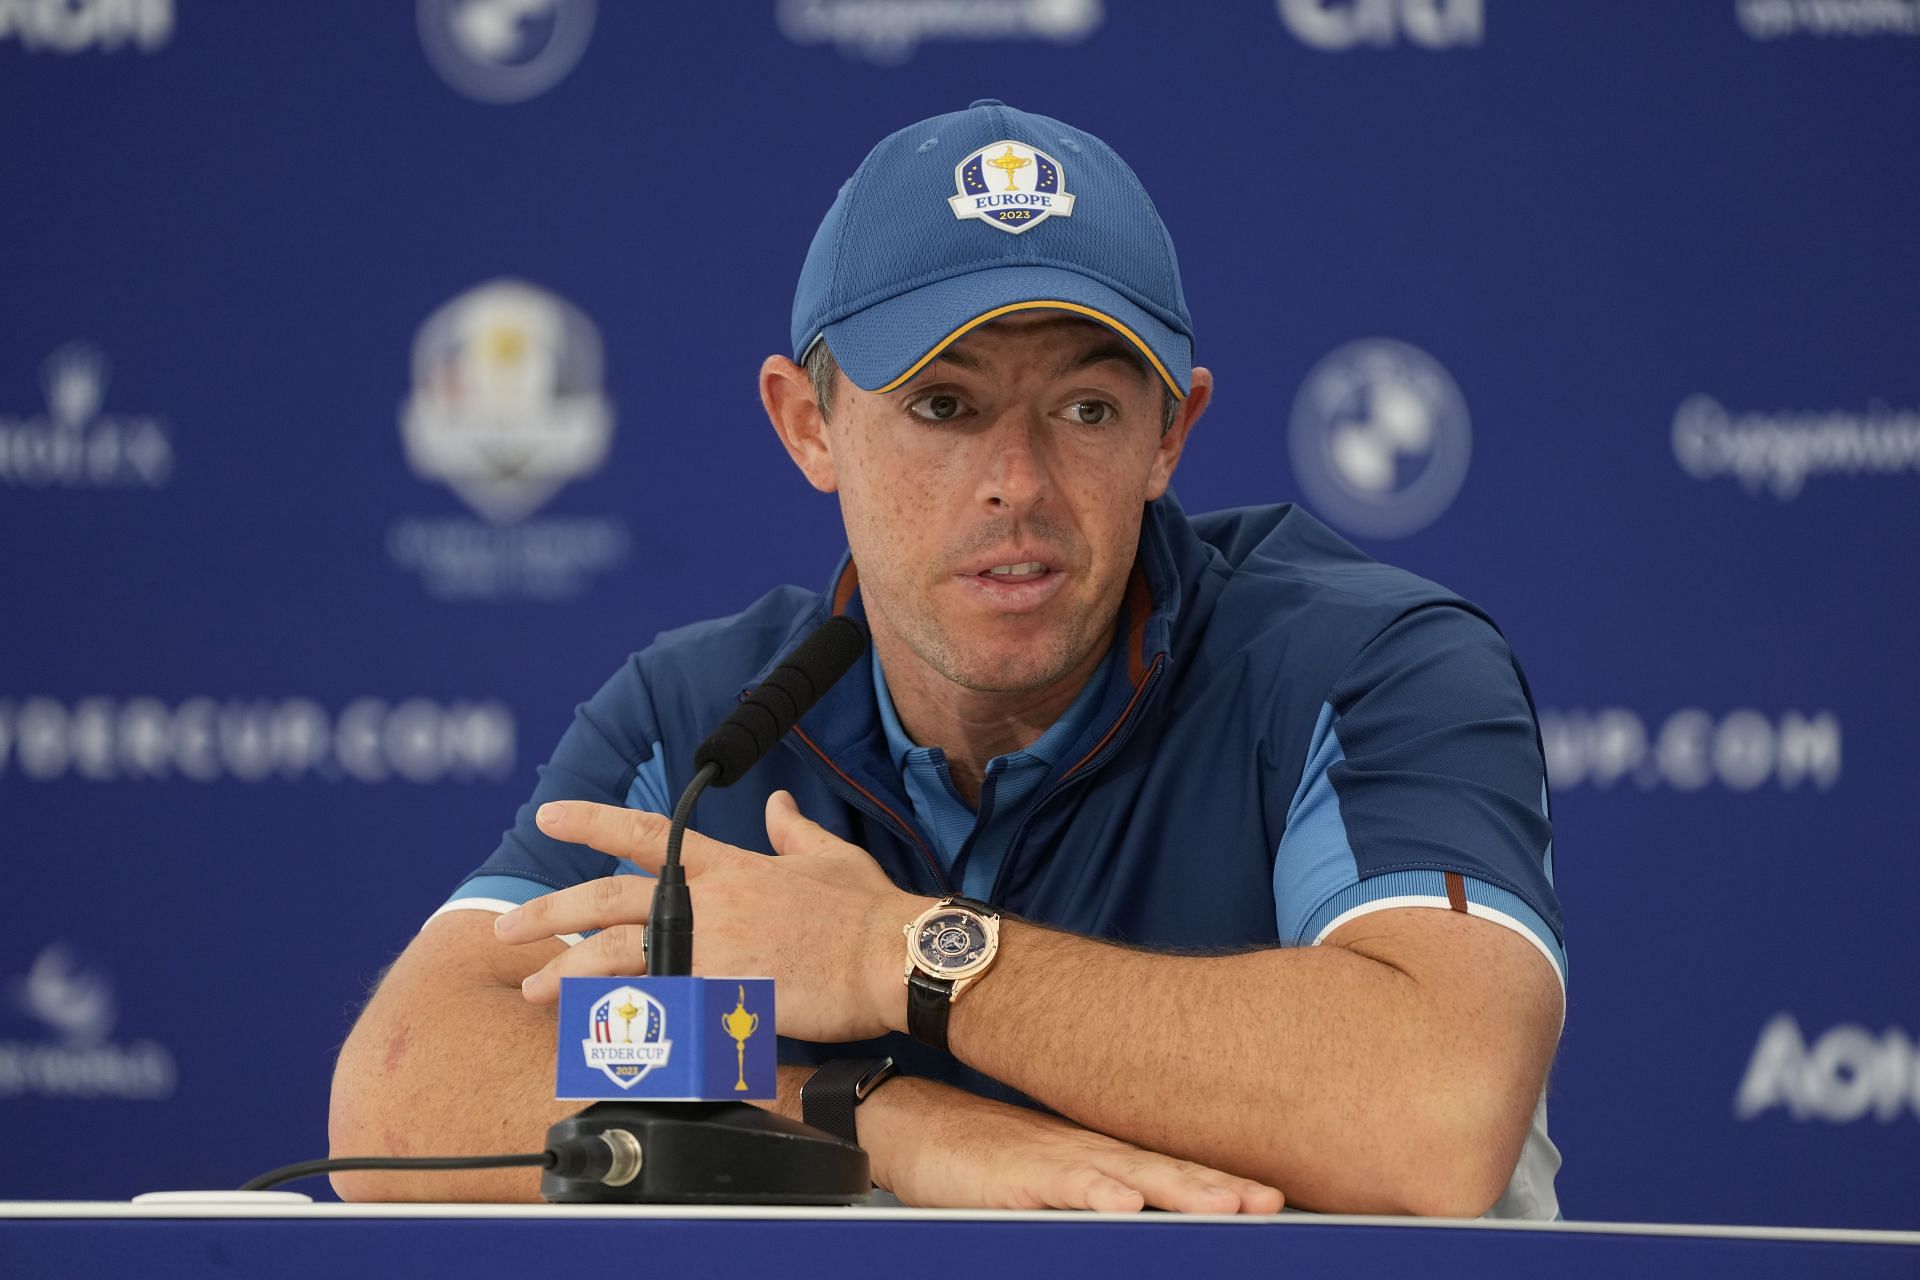 Rory McIlroy meets the journalists during a press conference (Image via AP Photo)